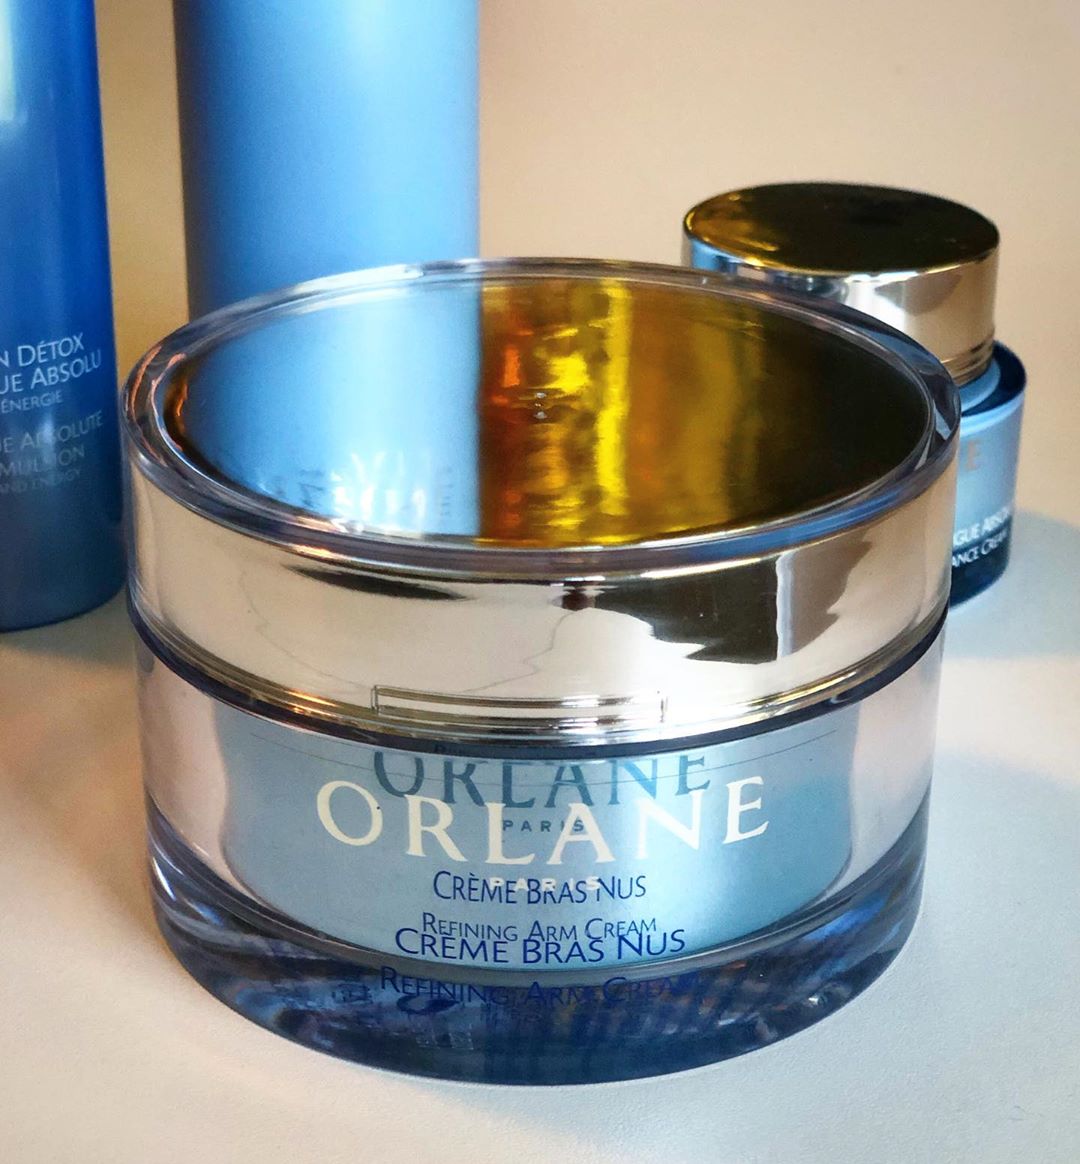 Orlane Paris - All time favorite and best seller: our unique Orlane Arm Cream. Did you ever try it?
#miraclecream
.
.
.
#orlane #orlaneparis #b21 #armcream #unique #perfectarm #bestseller #iconic # be...